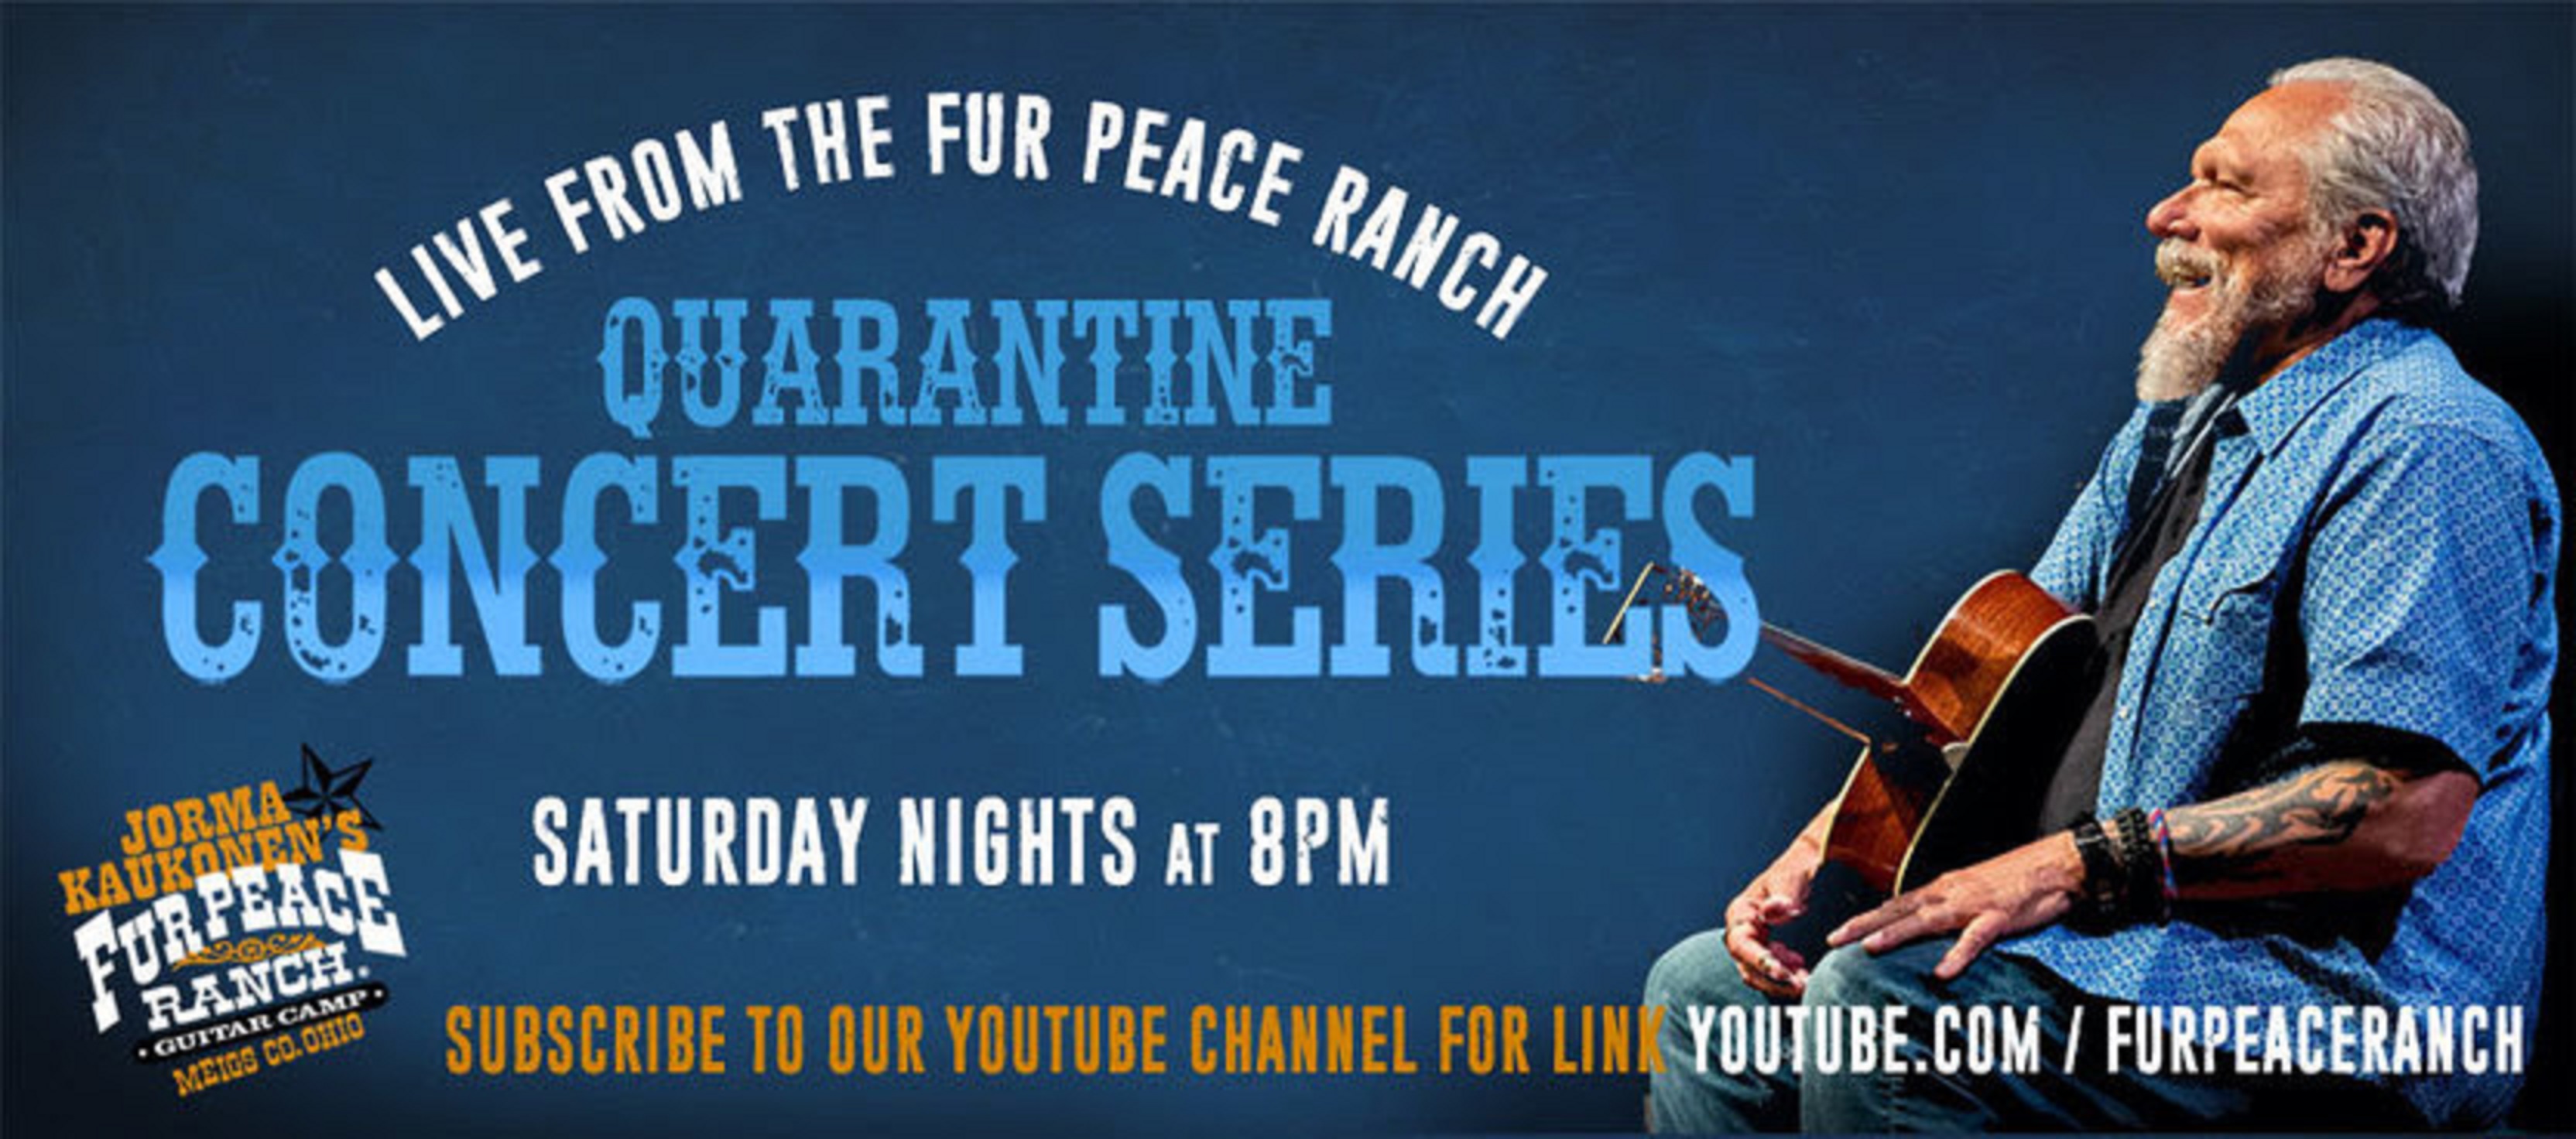 Celebrating the One-Year Anniversary of Jorma Kaukonen's Free Quarantine Concerts broadcast live from the Fur Peace Ranch